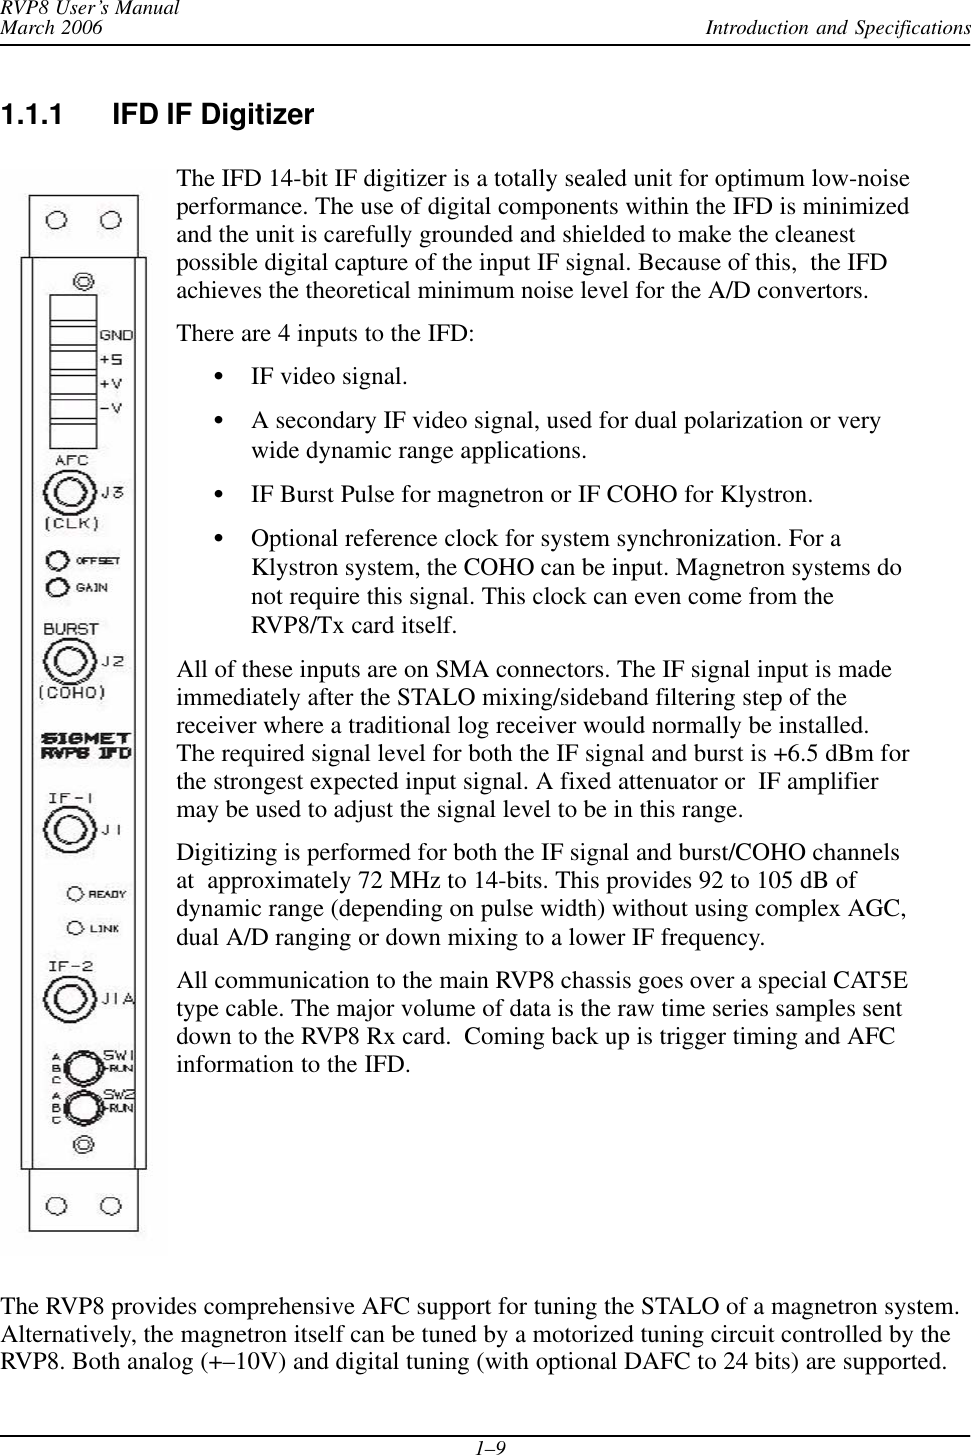 Introduction and SpecificationsRVP8 User’s ManualMarch 20061–91.1.1 IFD IF DigitizerThe IFD 14-bit IF digitizer is a totally sealed unit for optimum low-noiseperformance. The use of digital components within the IFD is minimizedand the unit is carefully grounded and shielded to make the cleanestpossible digital capture of the input IF signal. Because of this,  the IFDachieves the theoretical minimum noise level for the A/D convertors.There are 4 inputs to the IFD:SIF video signal.SA secondary IF video signal, used for dual polarization or verywide dynamic range applications.SIF Burst Pulse for magnetron or IF COHO for Klystron.SOptional reference clock for system synchronization. For aKlystron system, the COHO can be input. Magnetron systems donot require this signal. This clock can even come from theRVP8/Tx card itself.All of these inputs are on SMA connectors. The IF signal input is madeimmediately after the STALO mixing/sideband filtering step of thereceiver where a traditional log receiver would normally be installed.The required signal level for both the IF signal and burst is +6.5 dBm forthe strongest expected input signal. A fixed attenuator or  IF amplifiermay be used to adjust the signal level to be in this range.Digitizing is performed for both the IF signal and burst/COHO channelsat  approximately 72 MHz to 14-bits. This provides 92 to 105 dB ofdynamic range (depending on pulse width) without using complex AGC,dual A/D ranging or down mixing to a lower IF frequency.All communication to the main RVP8 chassis goes over a special CAT5Etype cable. The major volume of data is the raw time series samples sentdown to the RVP8 Rx card.  Coming back up is trigger timing and AFCinformation to the IFD.The RVP8 provides comprehensive AFC support for tuning the STALO of a magnetron system.Alternatively, the magnetron itself can be tuned by a motorized tuning circuit controlled by theRVP8. Both analog (+–10V) and digital tuning (with optional DAFC to 24 bits) are supported.